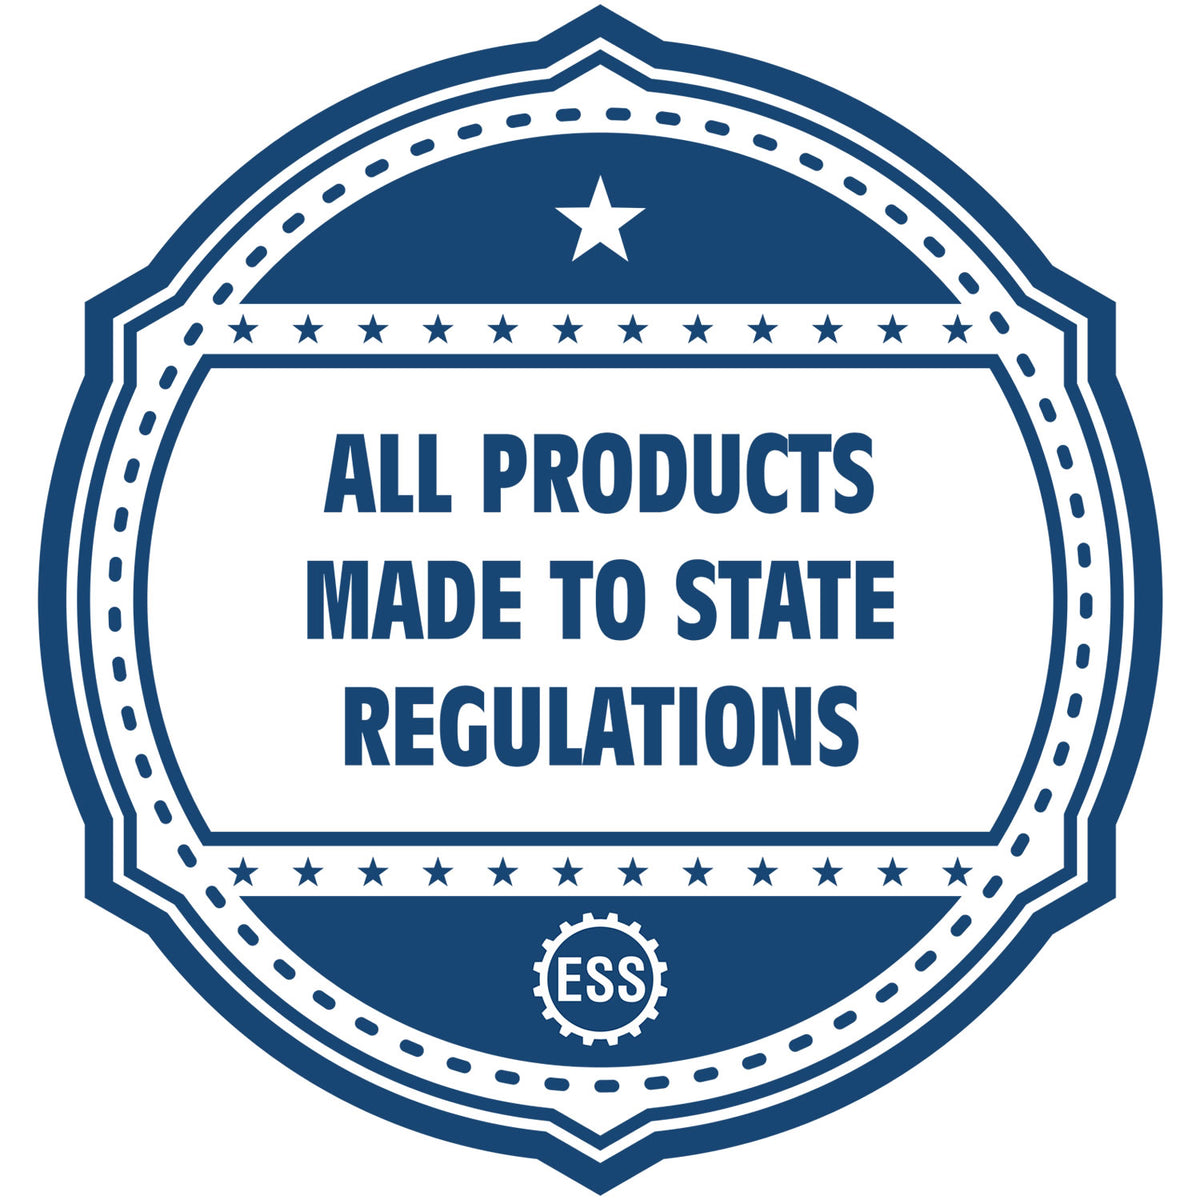 An icon or badge element for the Slim Pre-Inked Georgia Architect Seal Stamp showing that this product is made in compliance with state regulations.